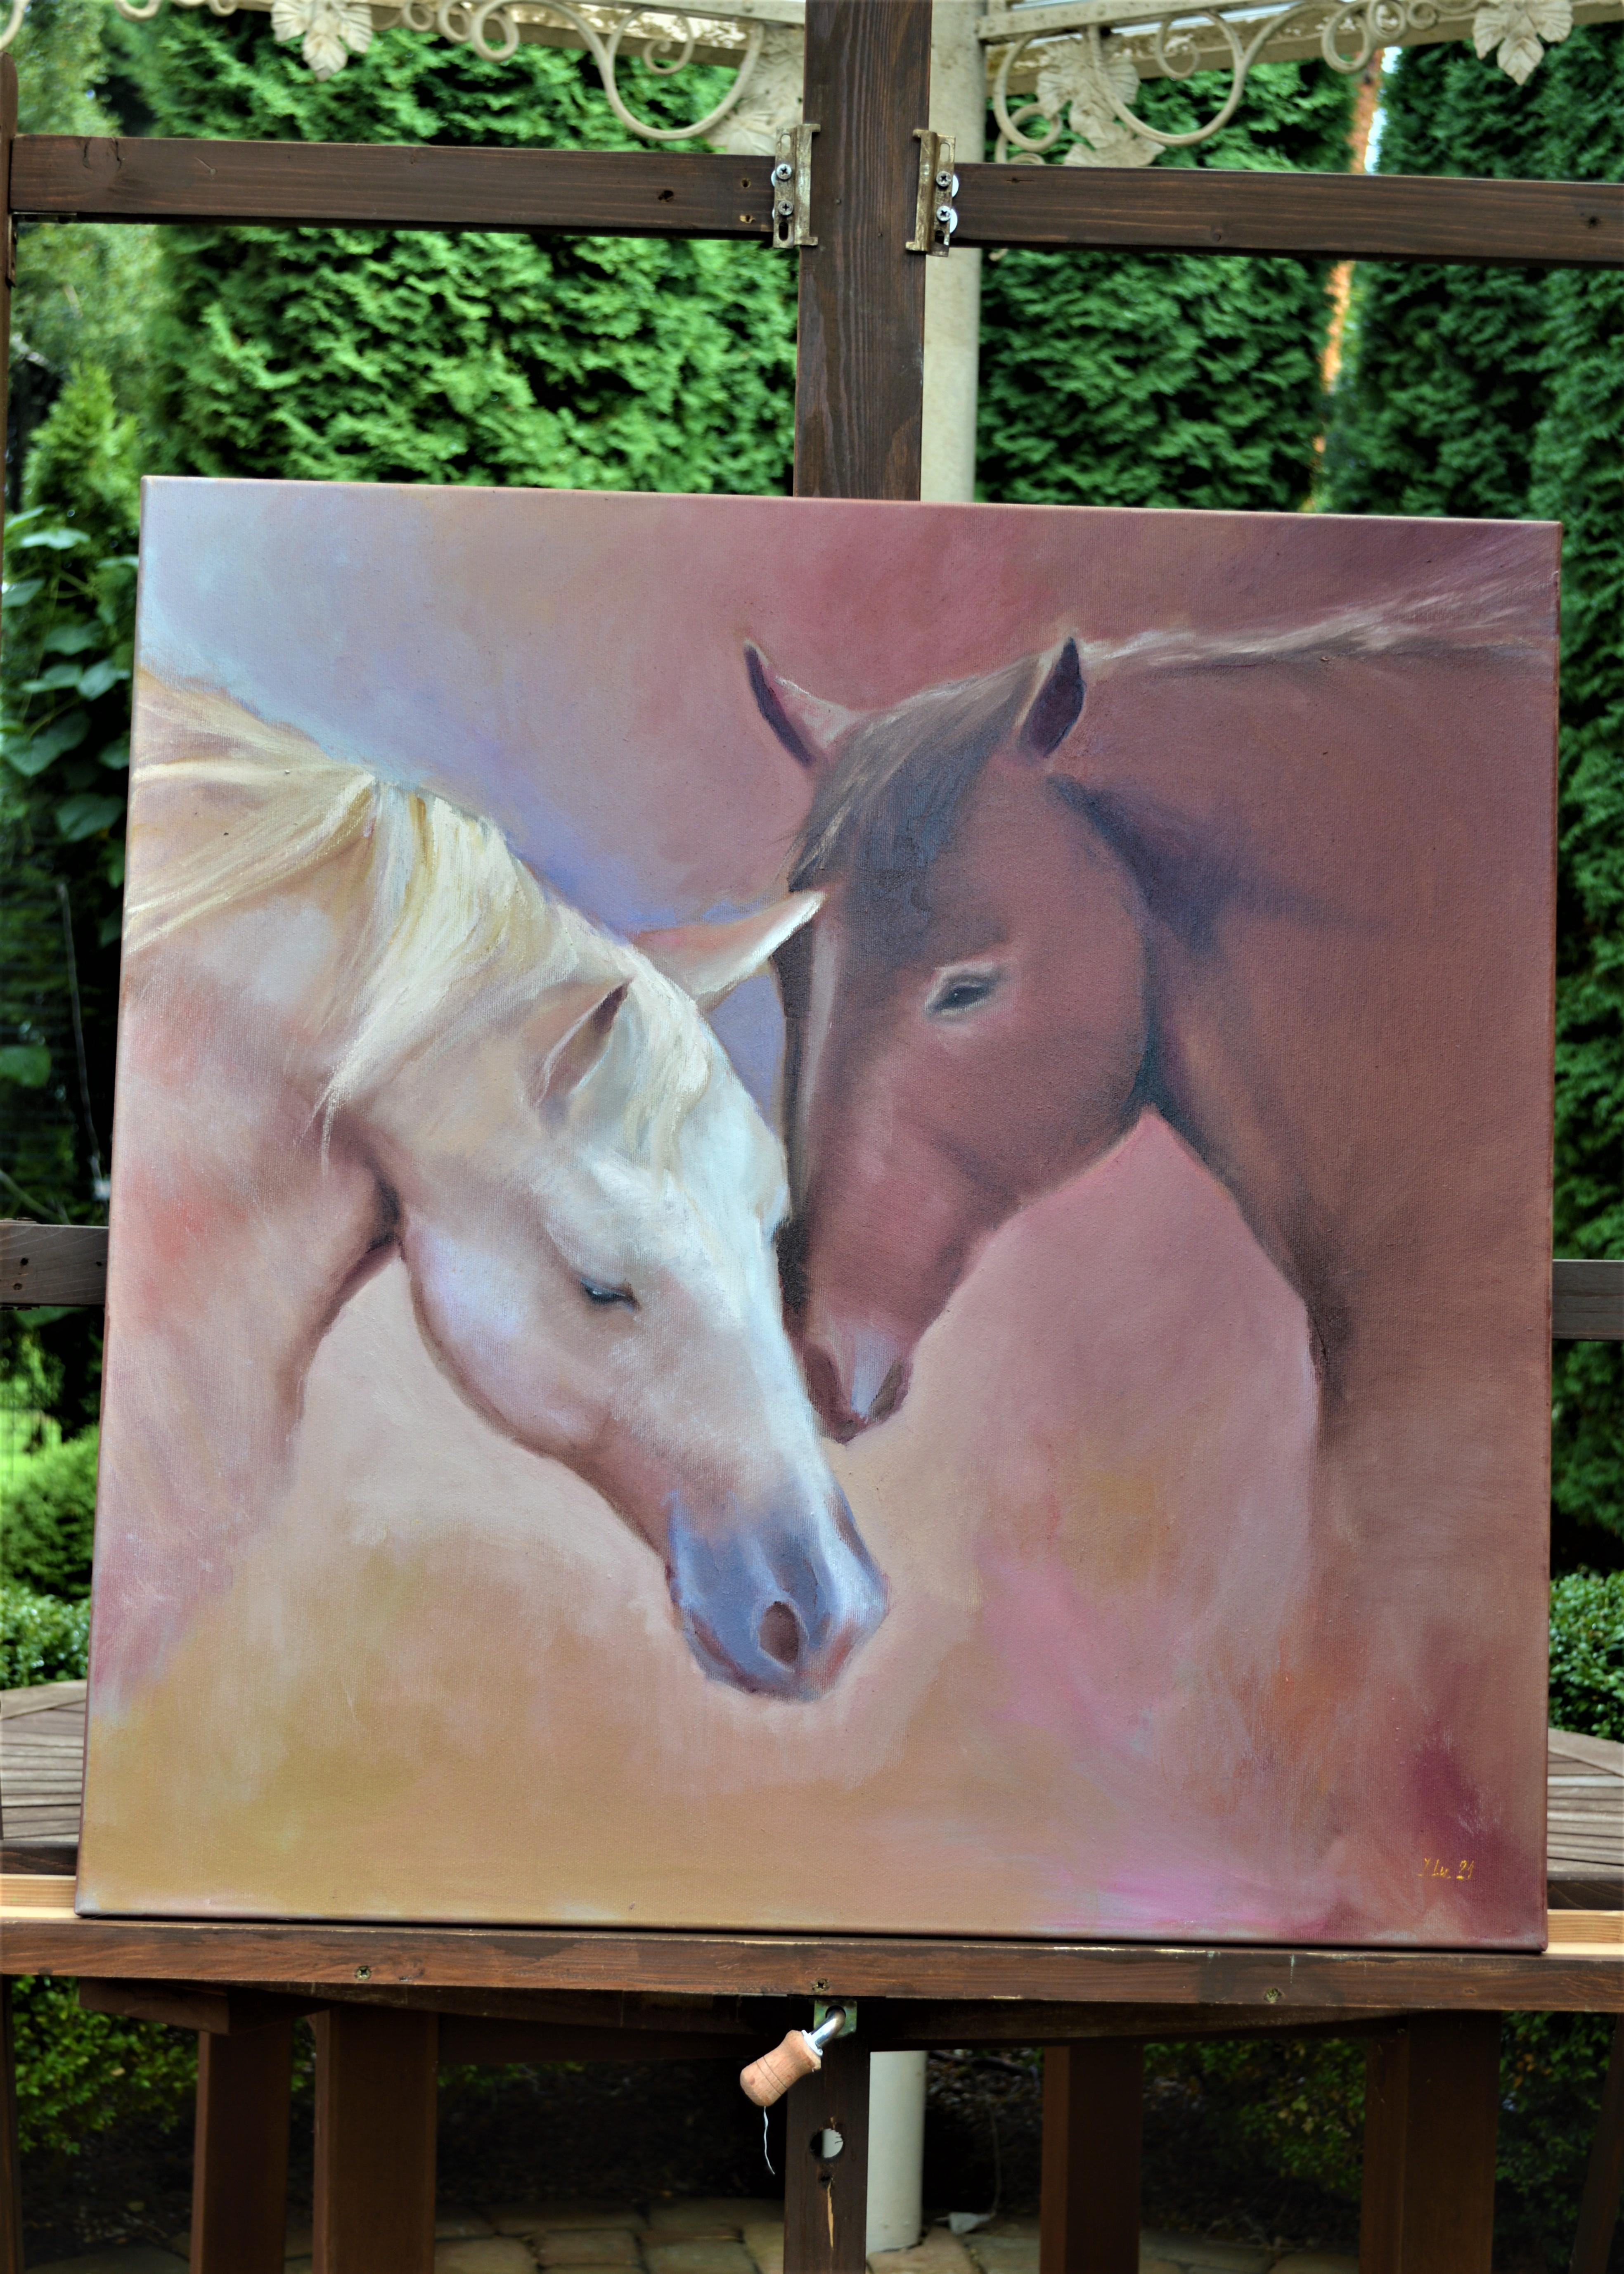 In this oil painting, I strove to capture the essence of companionship and the gentle intimacy shared between two majestic beings. The warm, soft hues and delicate brushwork express a deep sense of peace and harmony. It's a celebration of